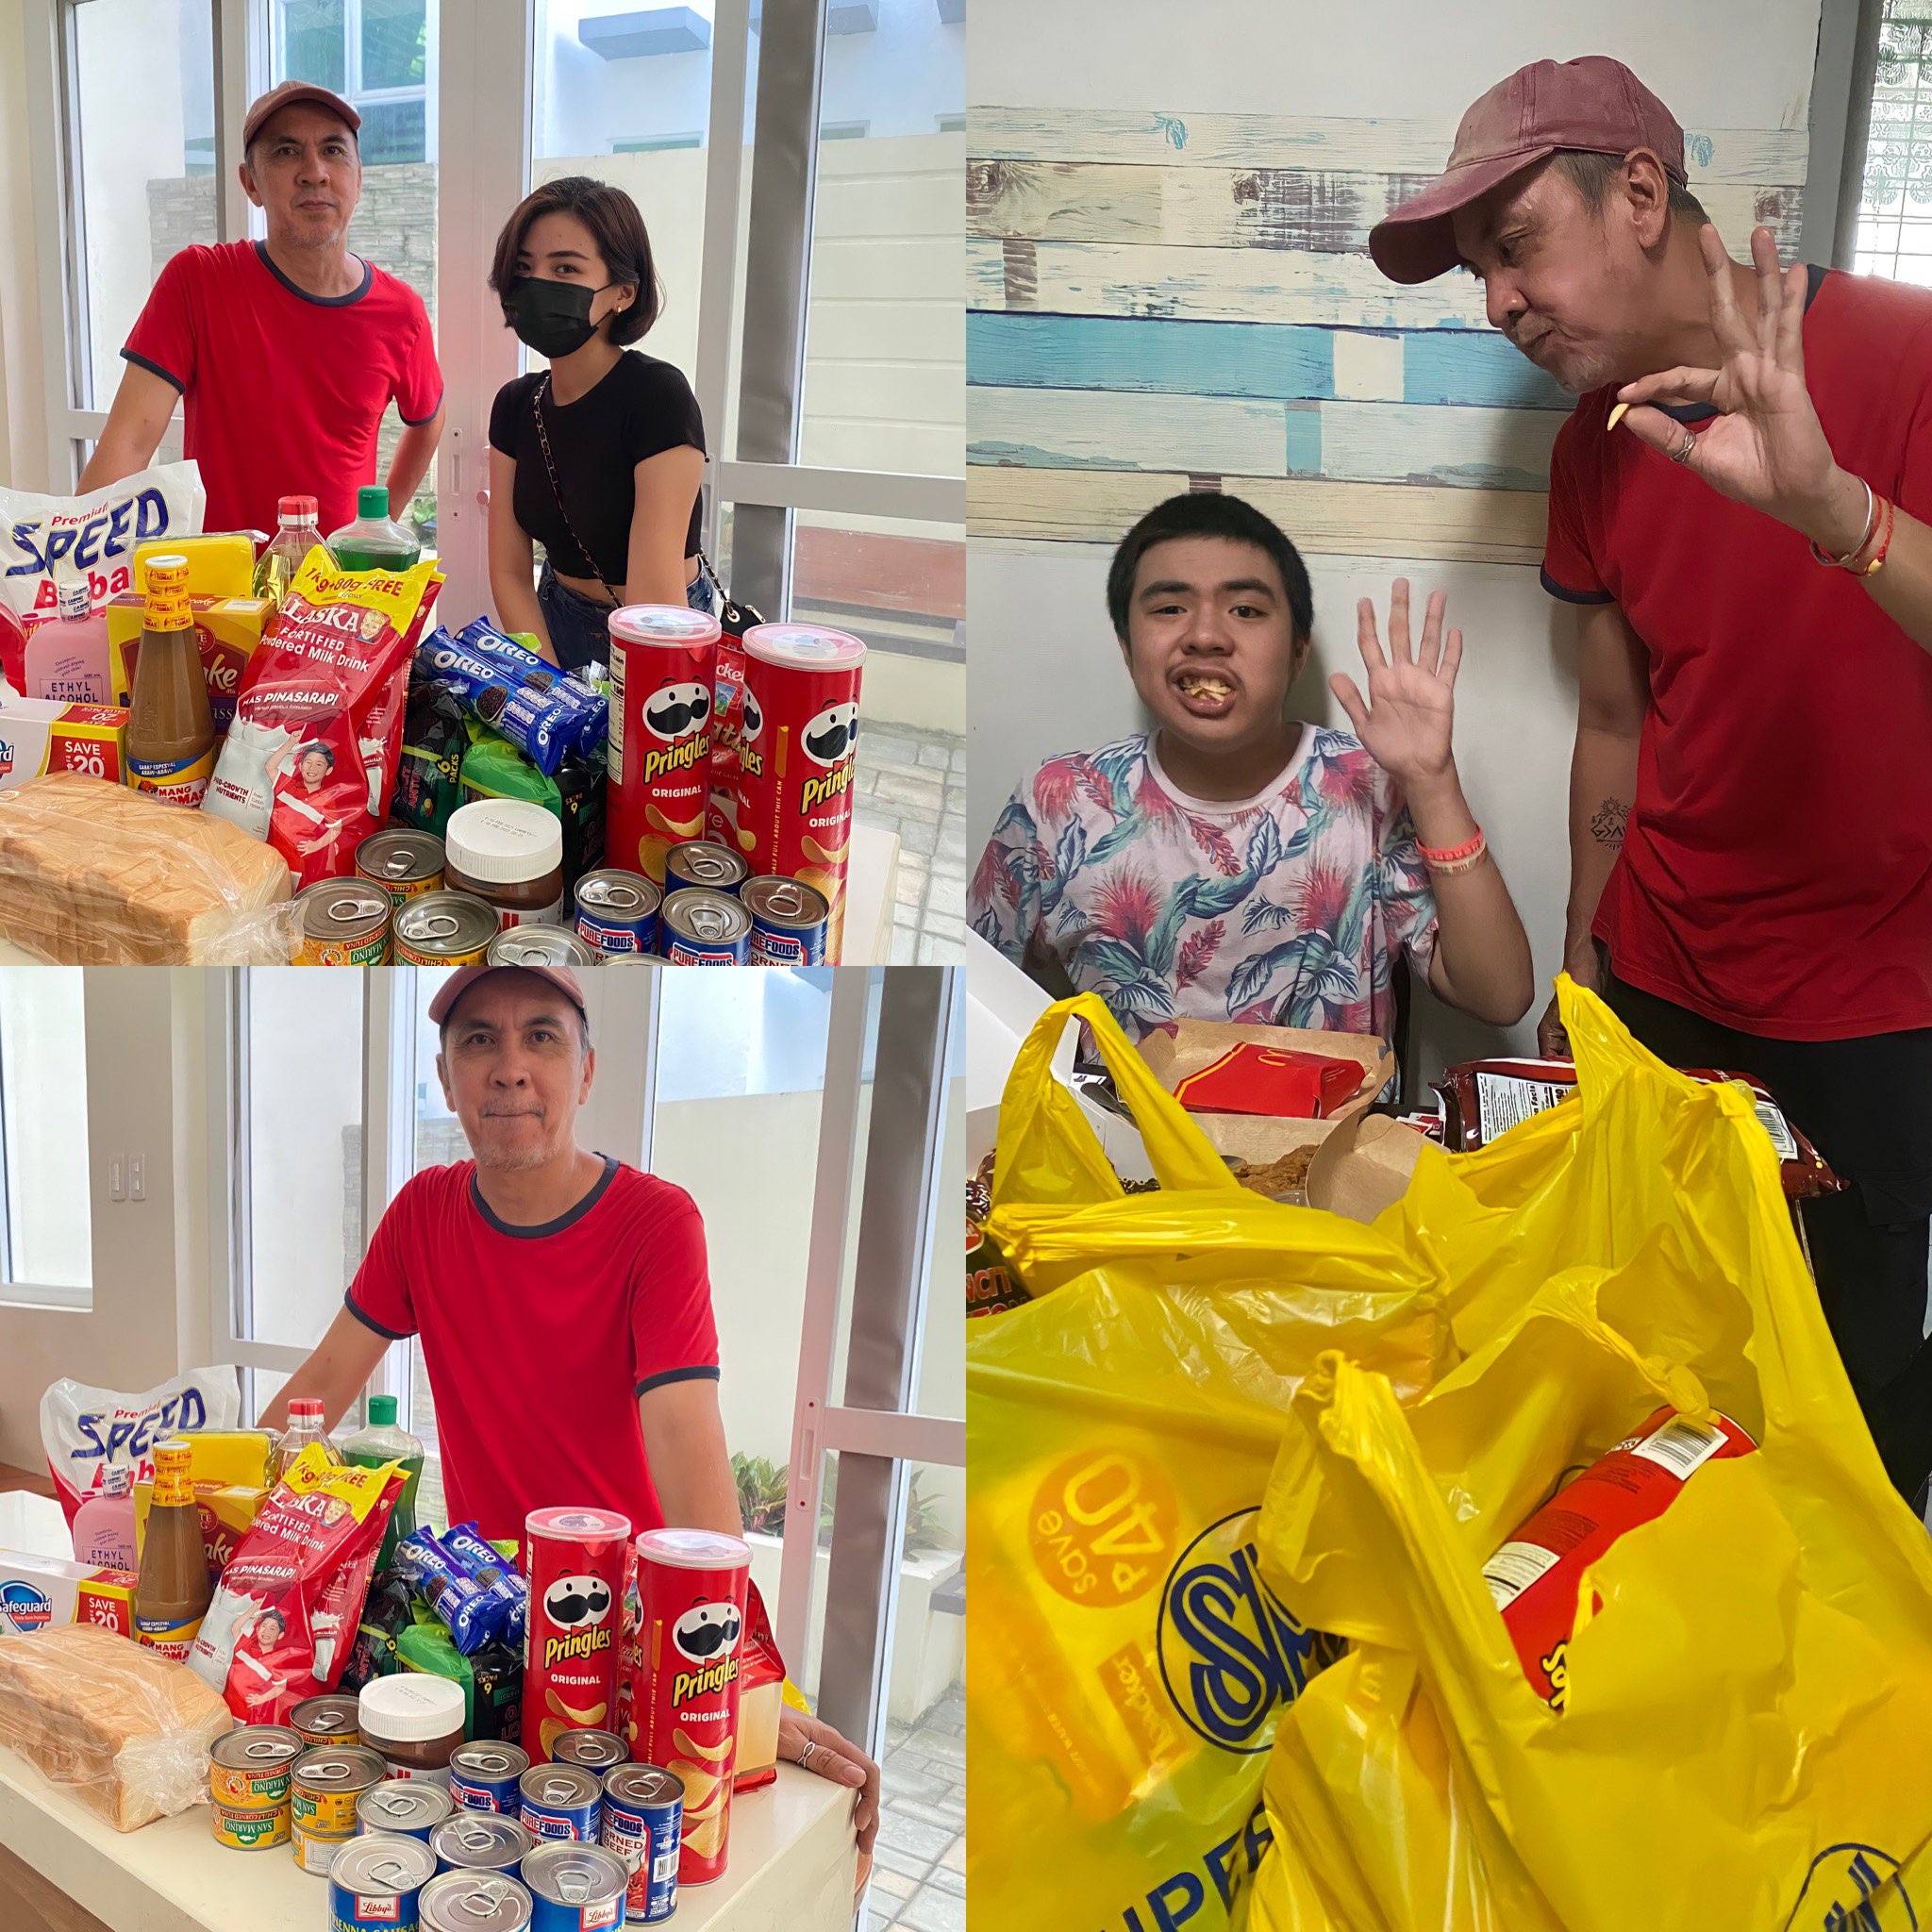 A.G Maxinnamon: Most of what I received was used for our grocery and food. My brother who has autism was so overwhelmed because I bought him all his favorite snacks. 